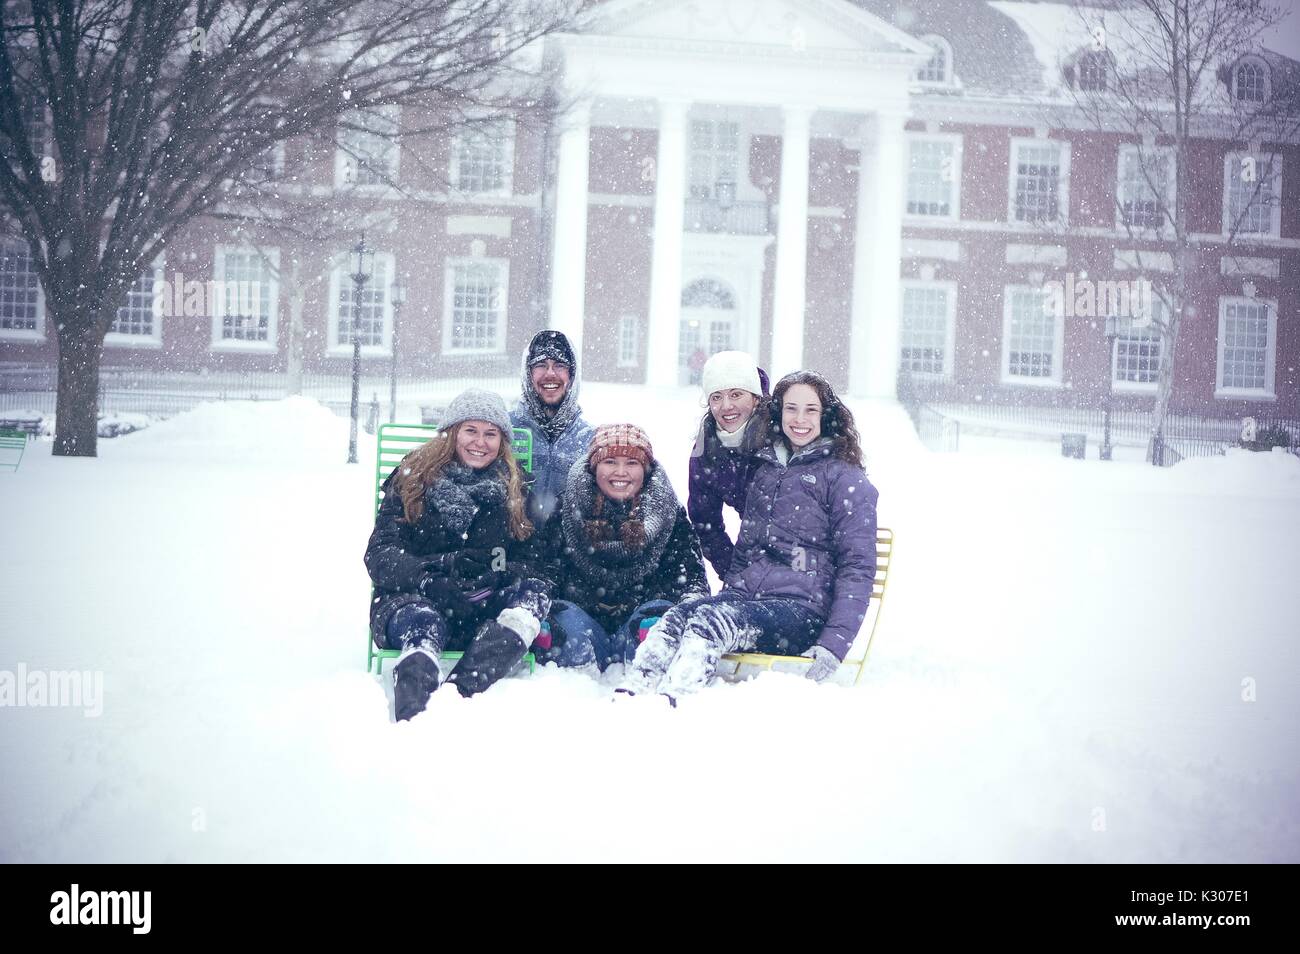 Four female students and one male student sit together on colorful lawn chairs posing for their photo on the snowy quad in front of Gilman Hall, on a snow day at Johns Hopkins University, Baltimore, Maryland, 2016. Stock Photo